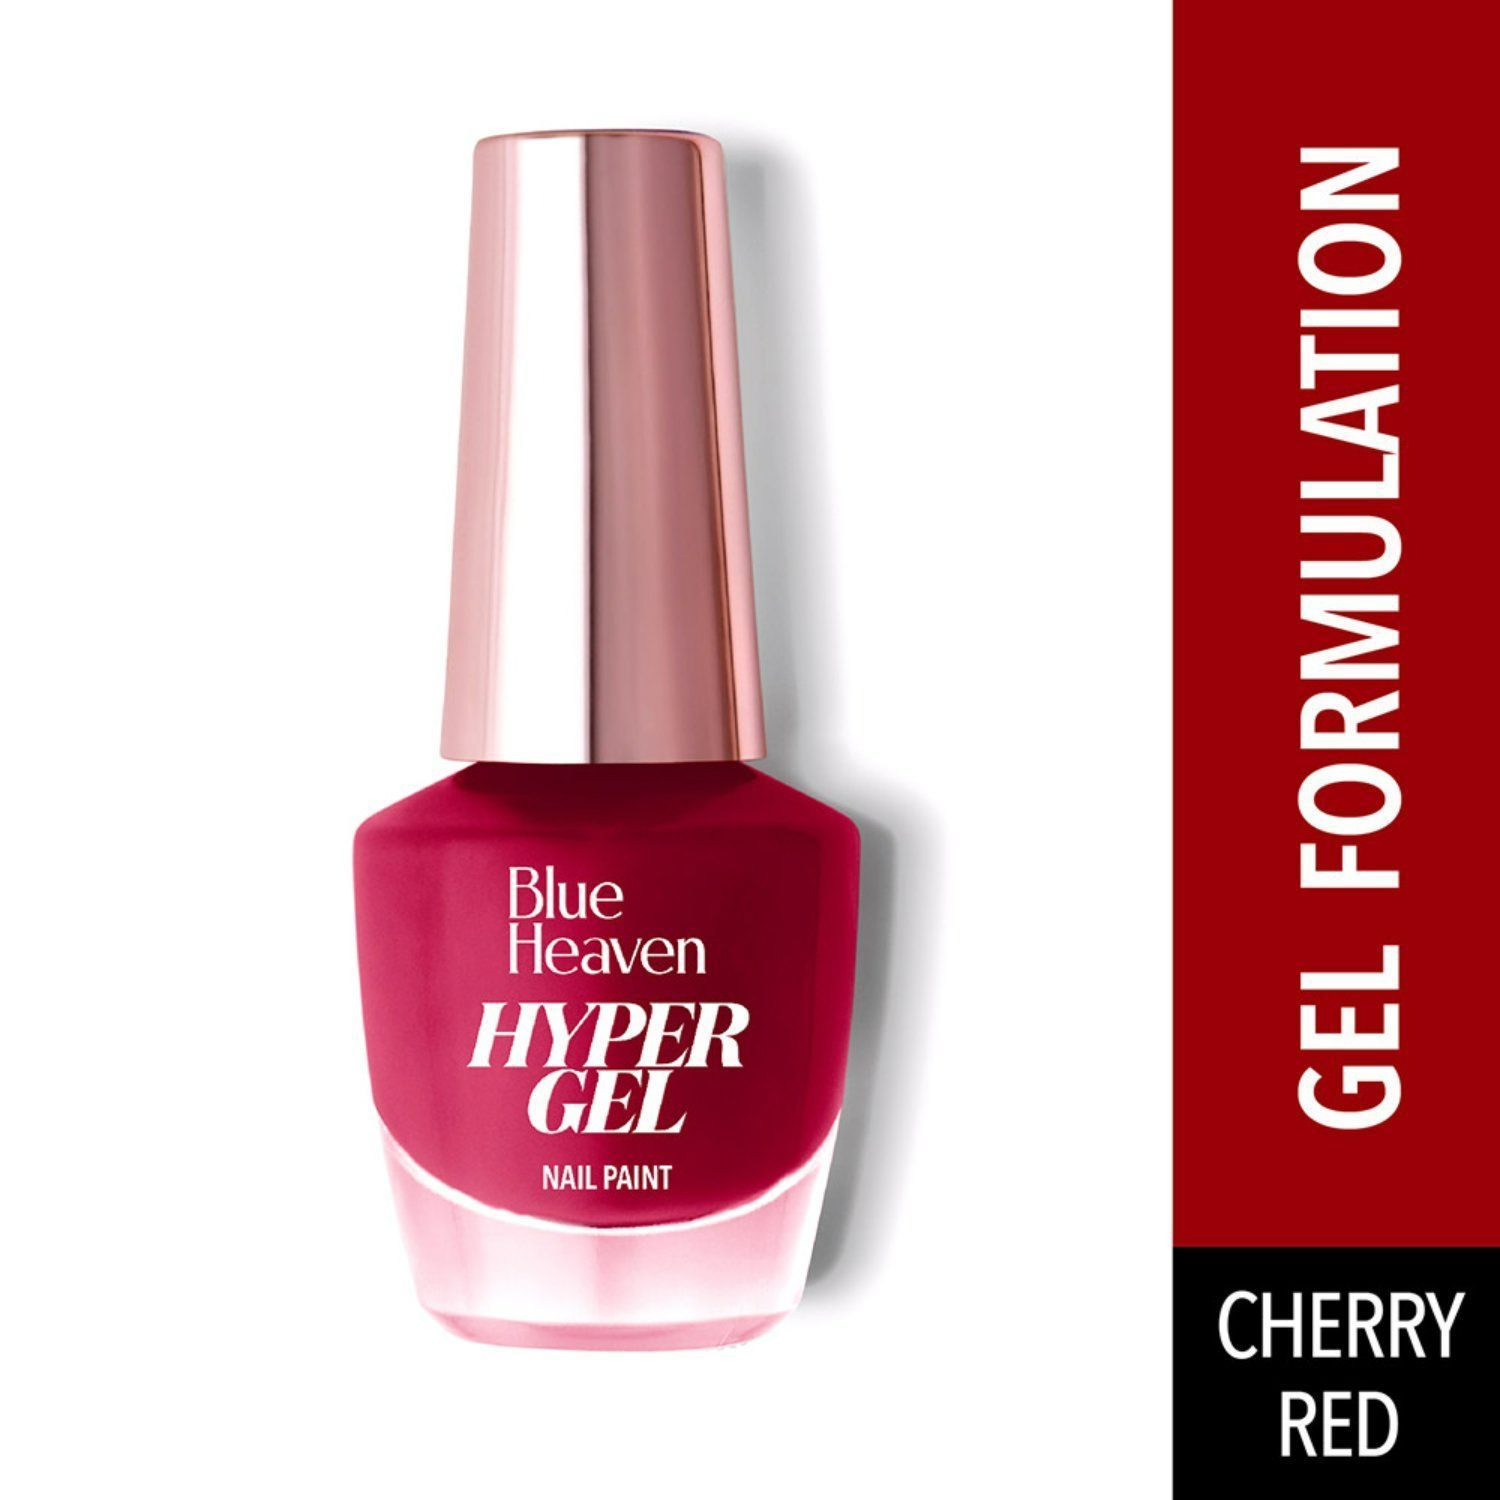 Buy Blue Heaven Hypergel Nail Paint Cherry Red 505 - Purplle